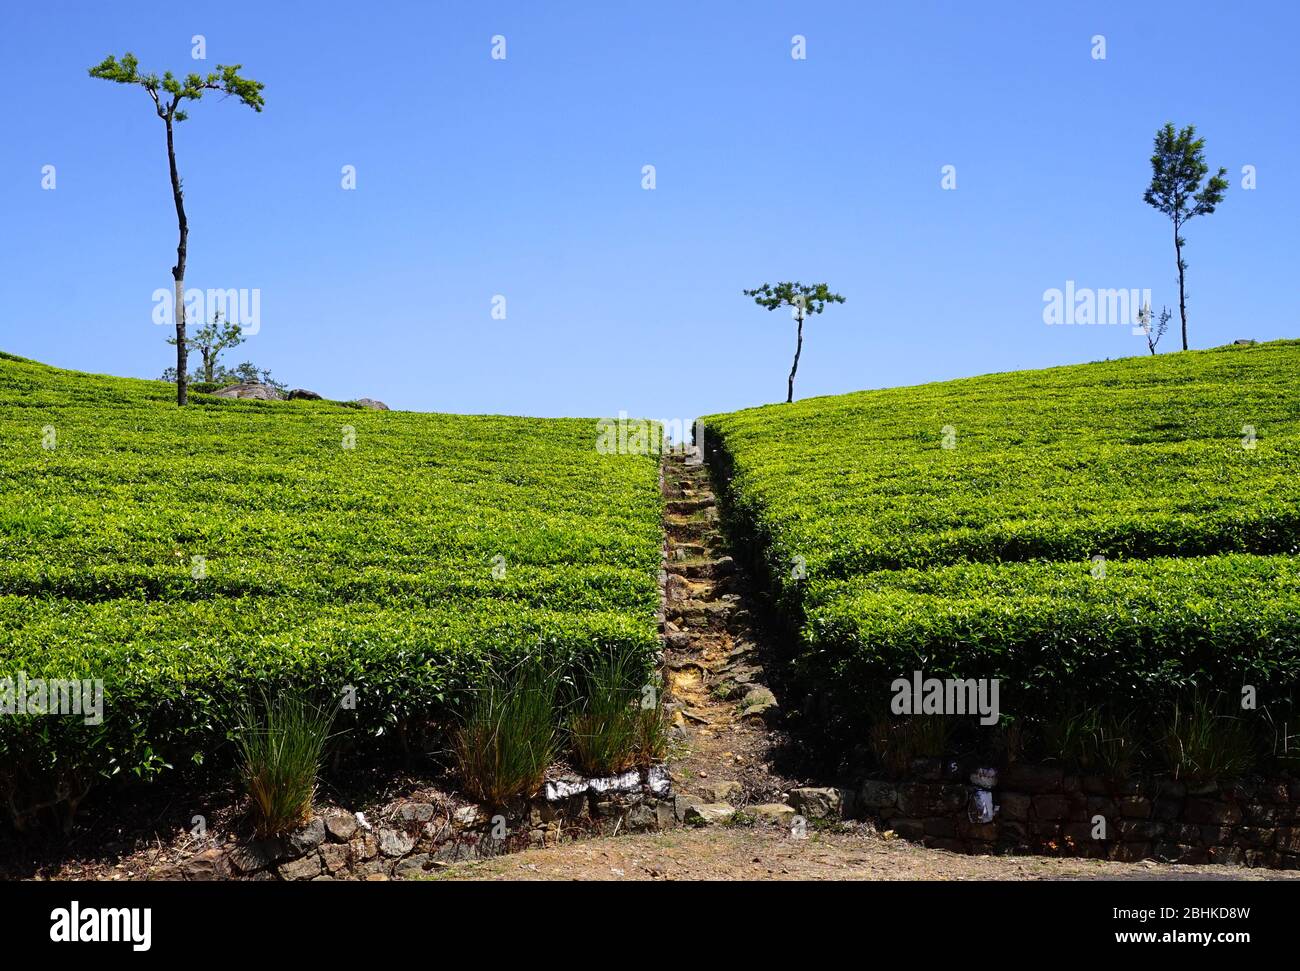 Tea plants bisected by a path in a tea plantation near Lipton's Seat in Sri Lanka's Hill Country Stock Photo